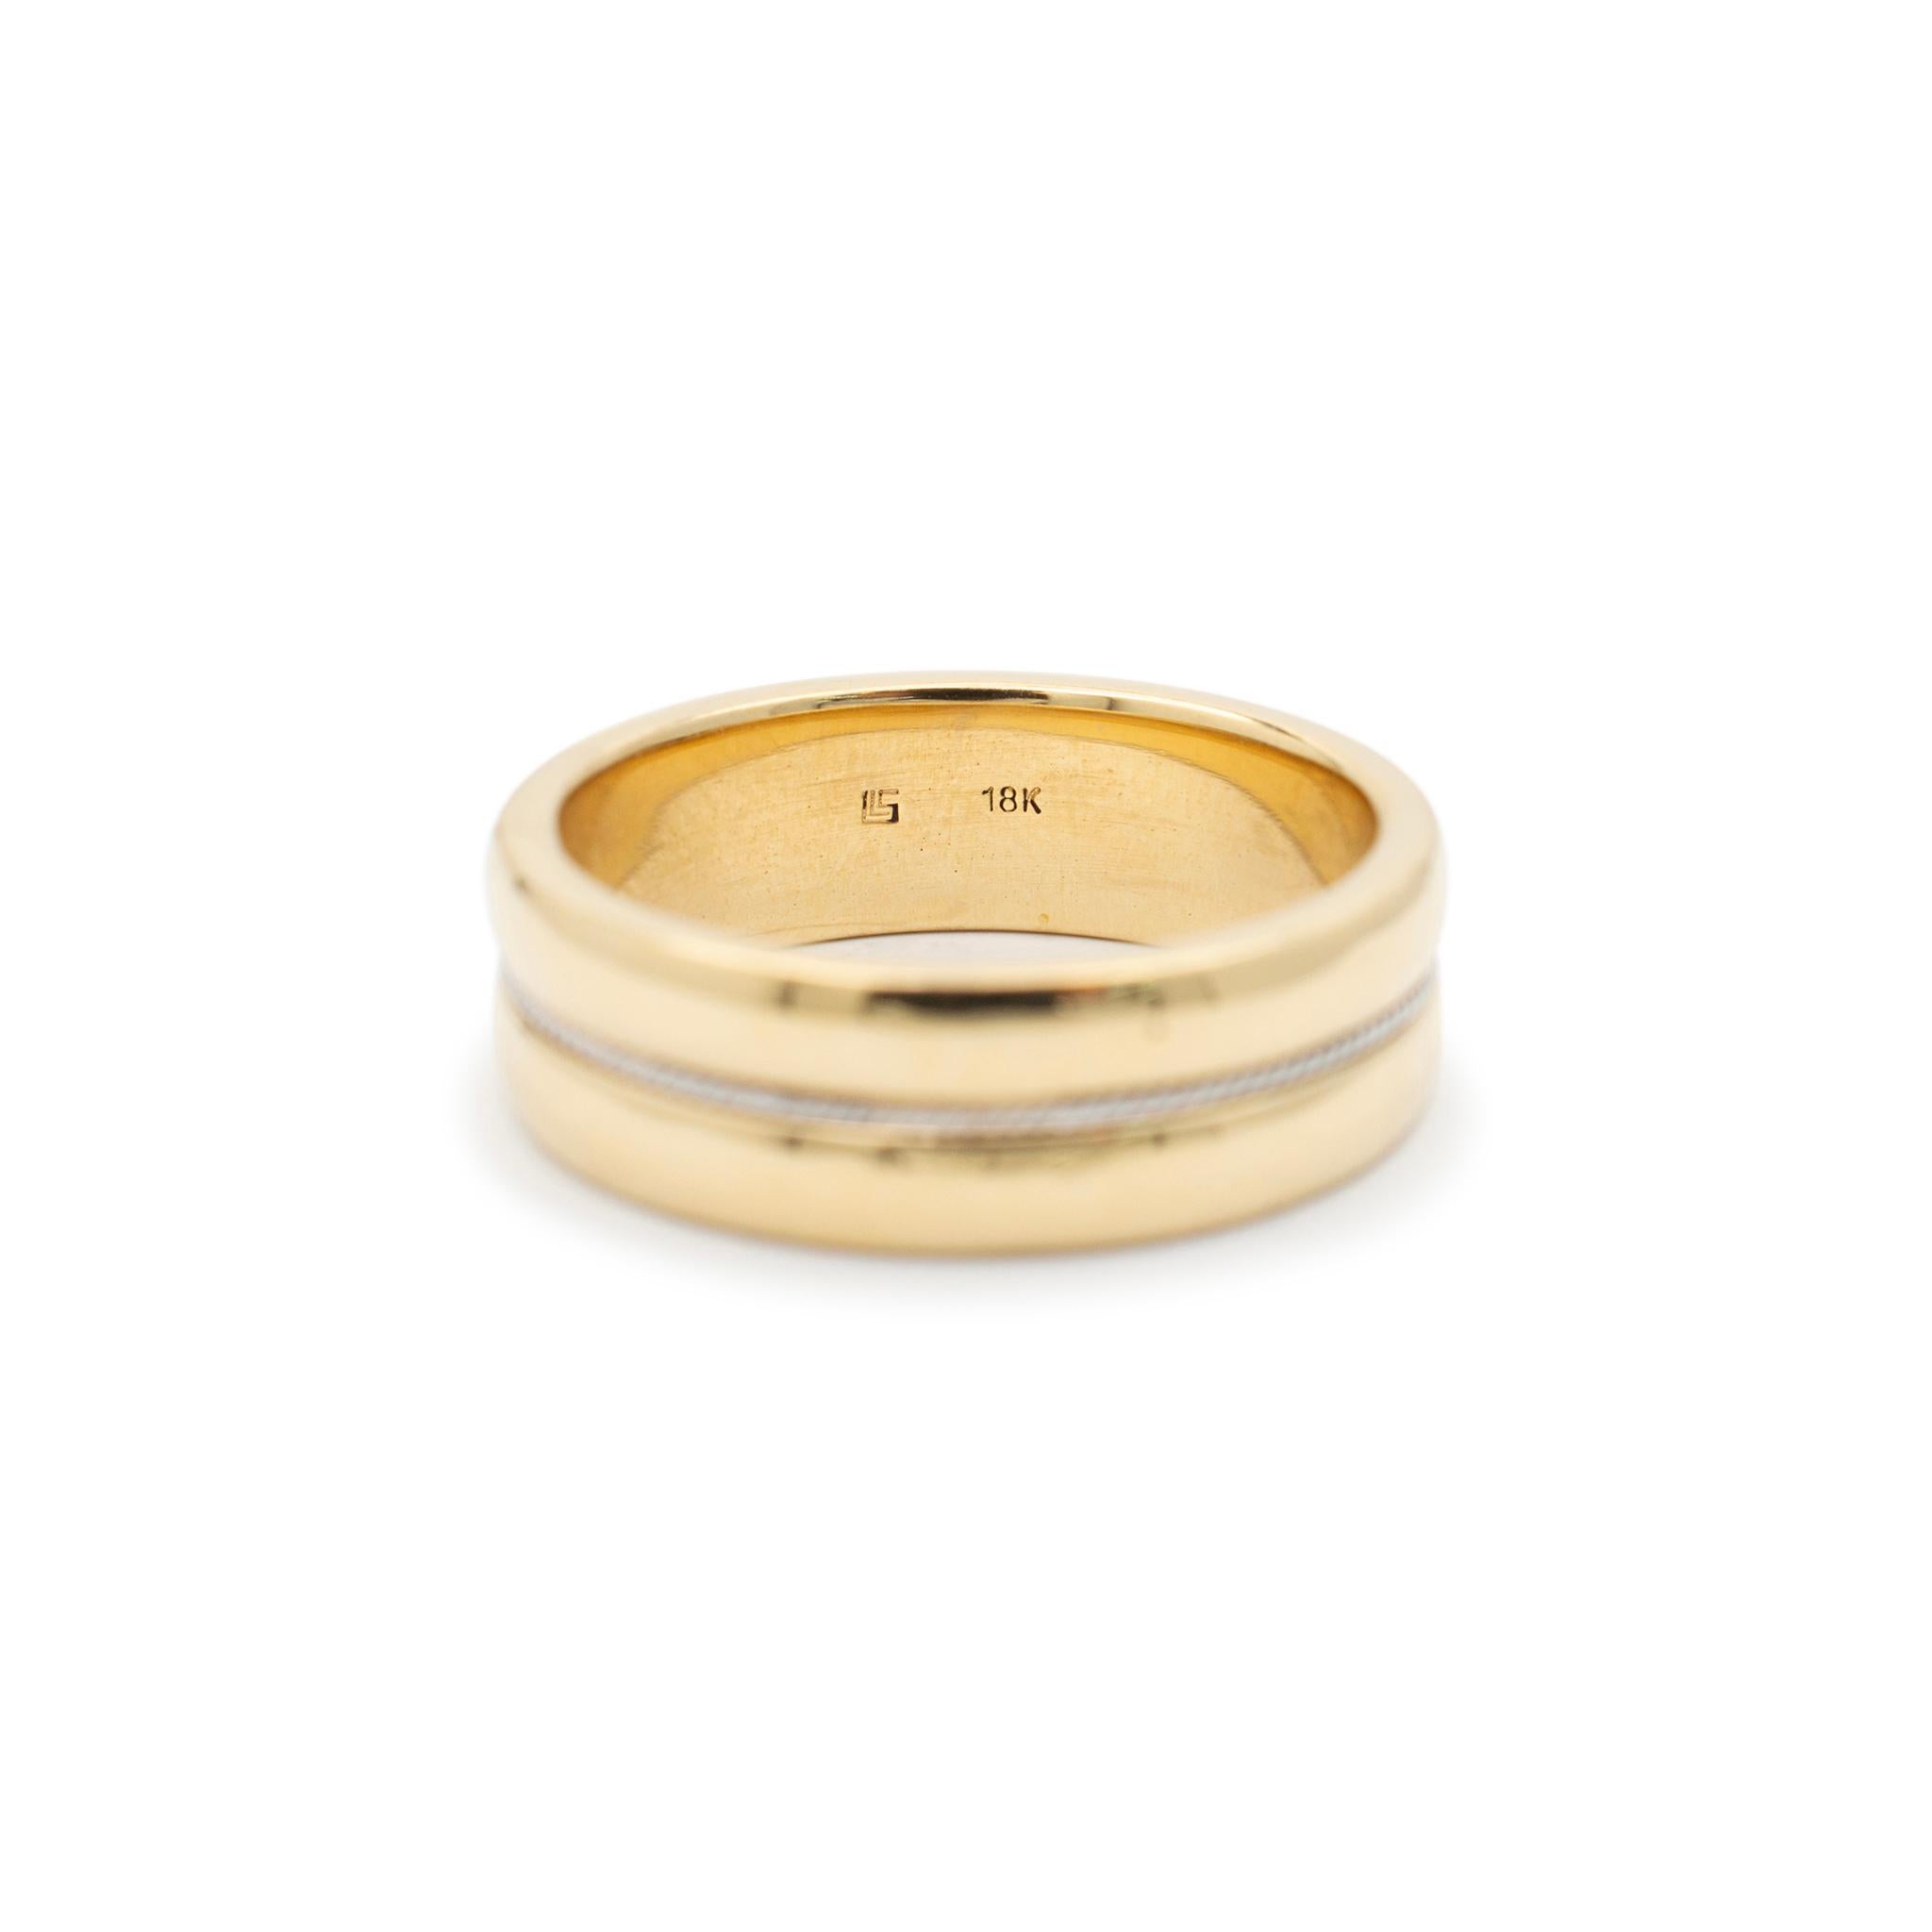 Gender: Men

Metal Type: 18K Yellow Gold

Size: 12.5

Shank Maximum Width: 7.80

Weight: 17.40 grams

Mans 18K yellow gold band with a half-round shank. Engraved with 